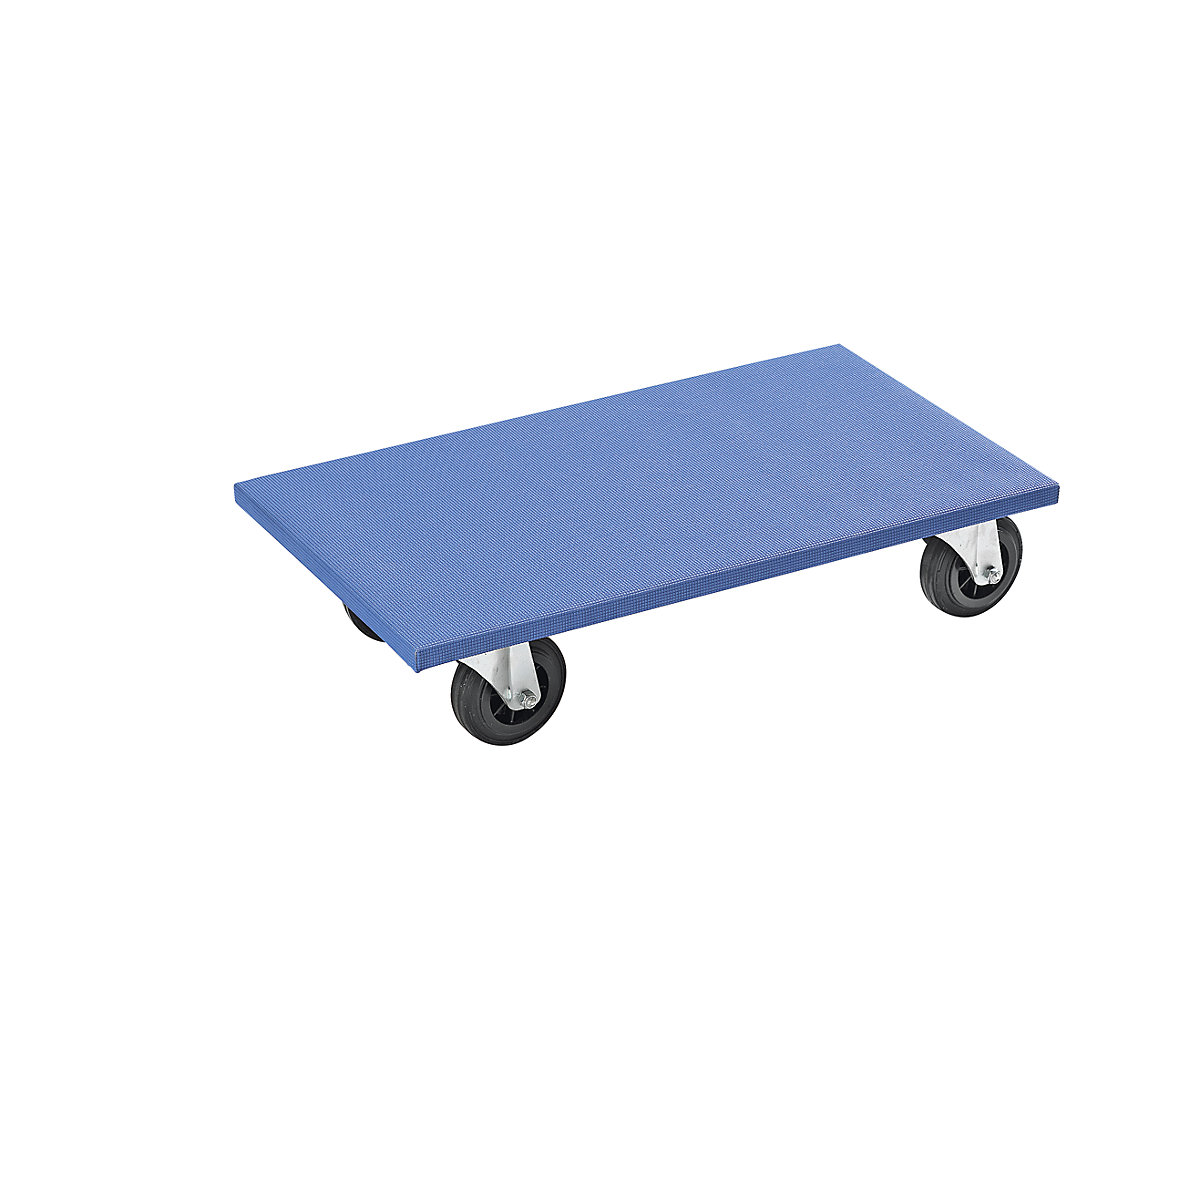 Furniture dolly, LxWxH 600 x 350 x 145 mm, pack of 2, max. load 300 kg, 5+ packs-7